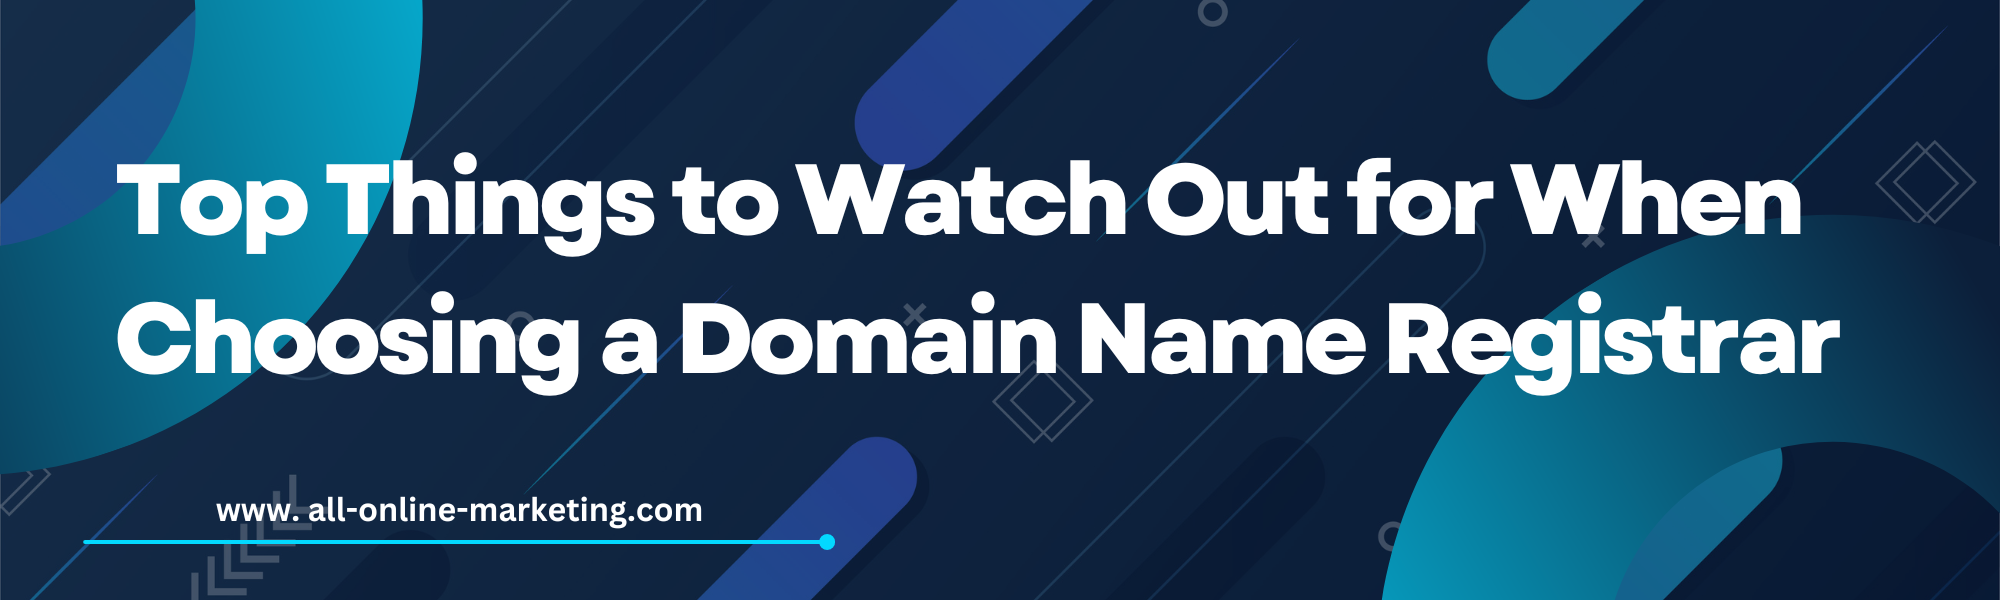 Top Things to Watch Out for When Choosing a Domain Name Registrar